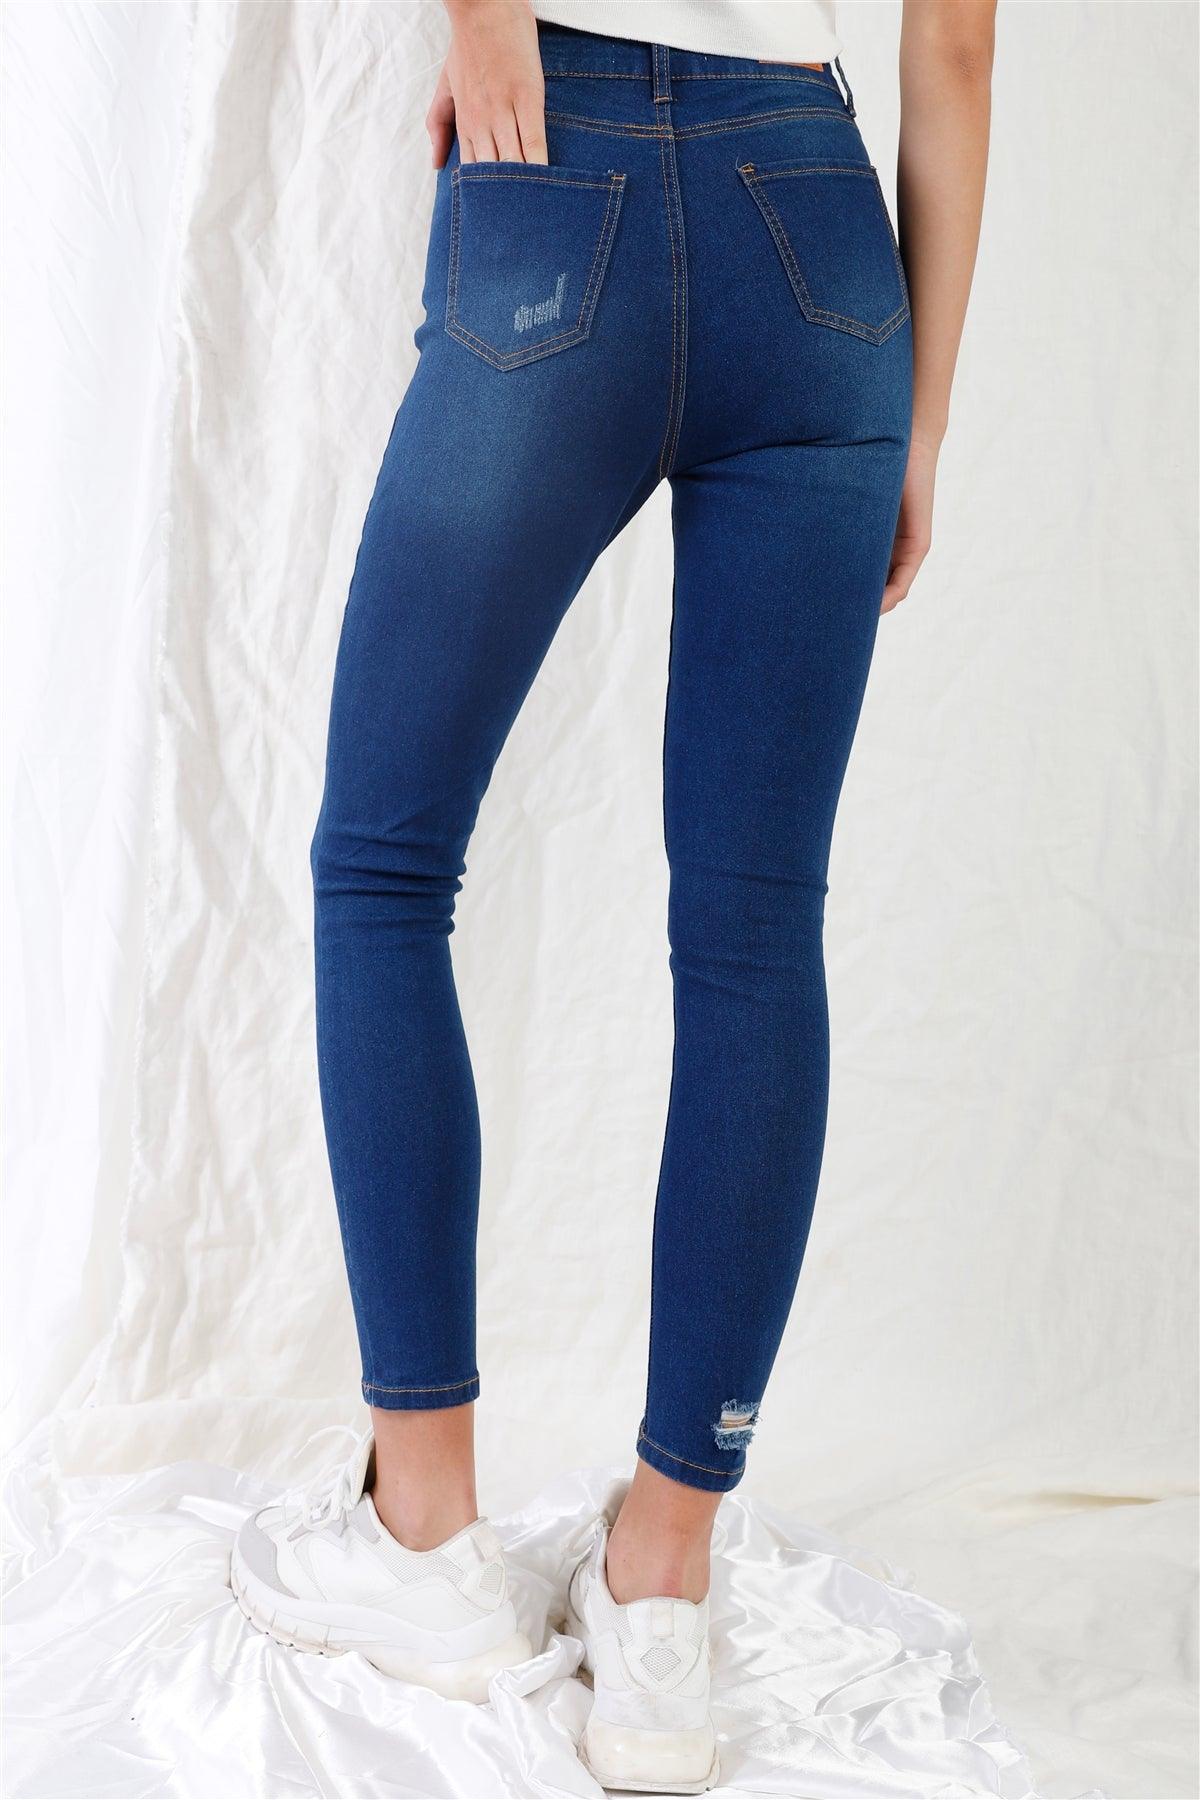 Dark Blue High-Waisted With Rips Skinny Denim Jeans /1-3-3-2-1-1-1